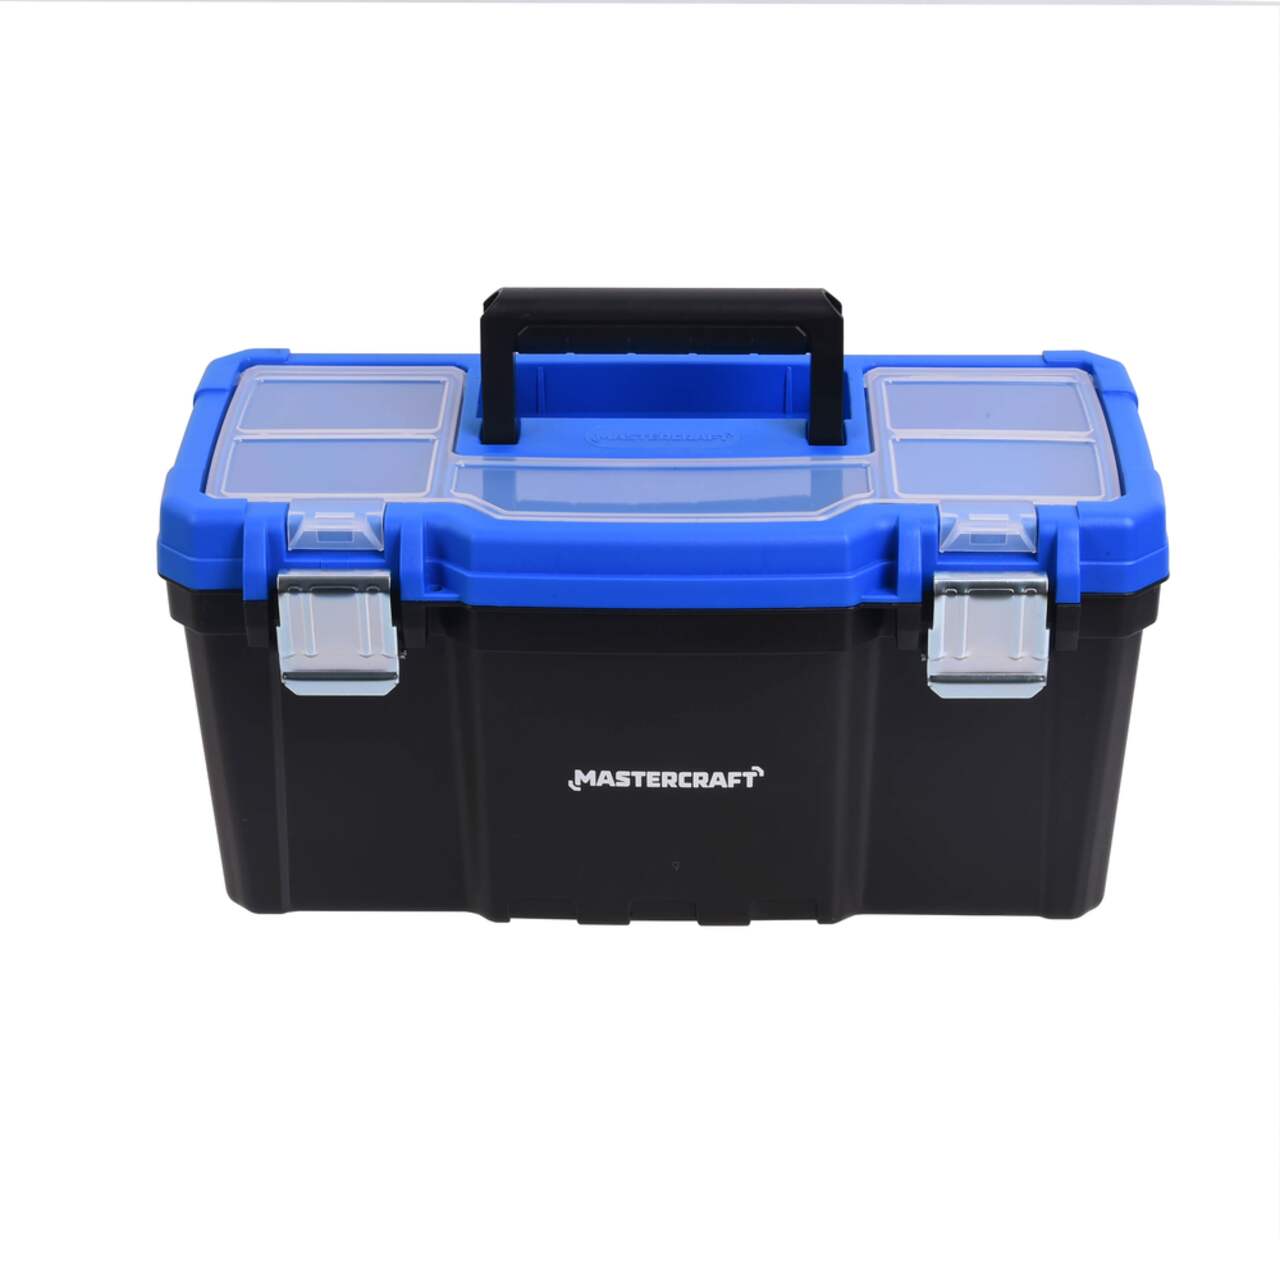 Mastercraft Portable Plastic Tool Box w/ Removable Tray & Tray Top, Blue,  16-in